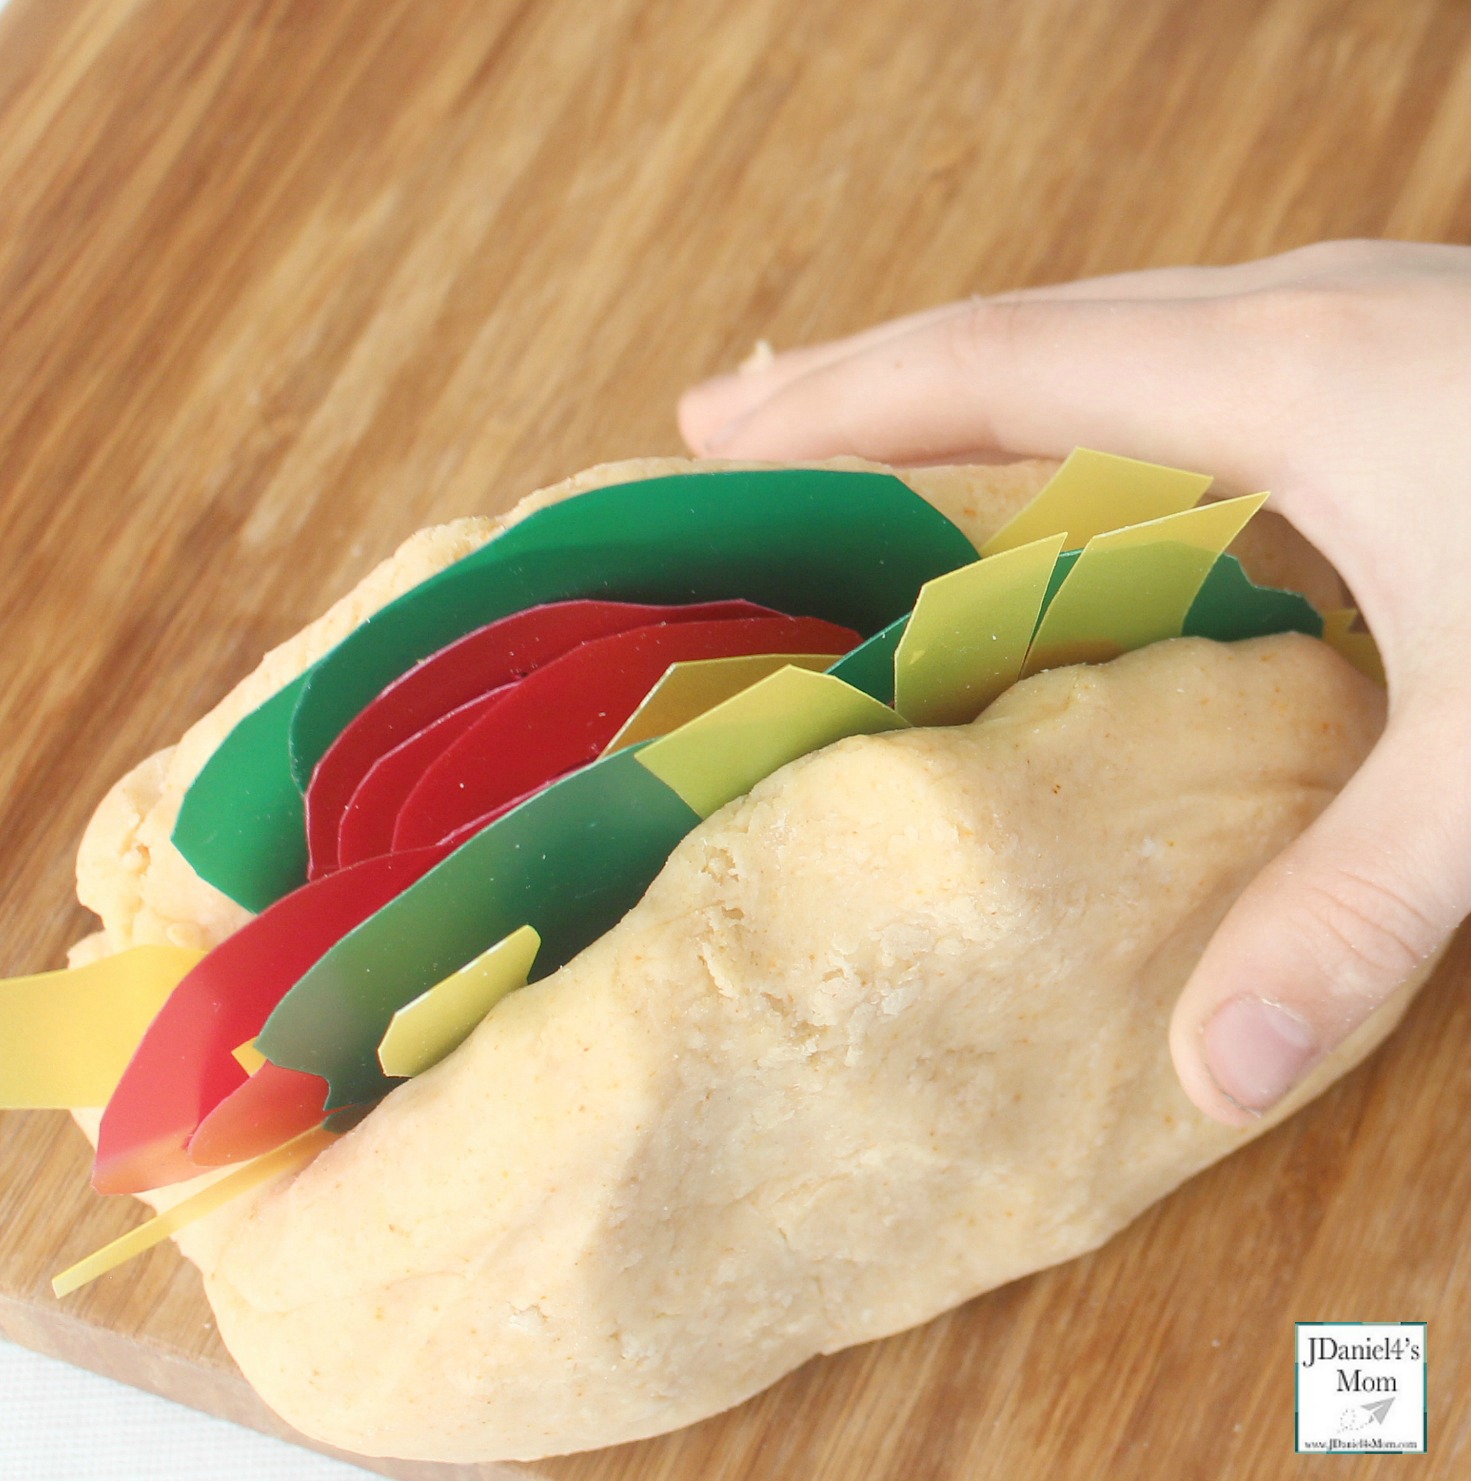 Dragons Love Tacos Themed Playdough Recipe and Activity - Children at home and students at school will have fun building dinosaurs sized tacos with taco scented playdough. This playdough recipe is so easy to make. This is what a filled taco looks like.